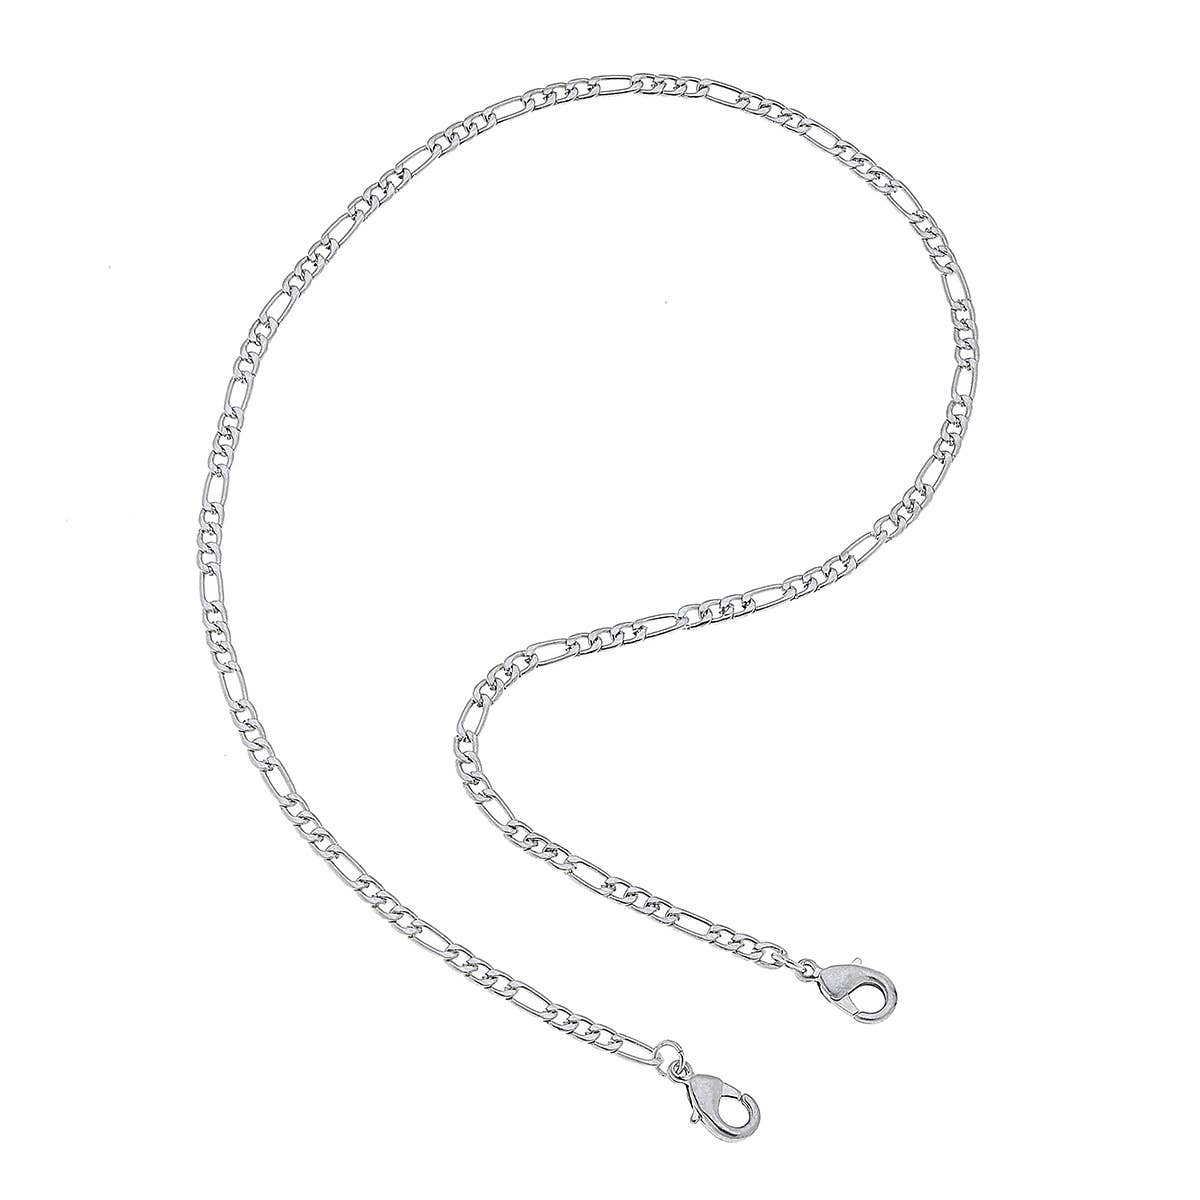 Soleil Figaro Chain Mask Necklace in Worn Silver - 20"